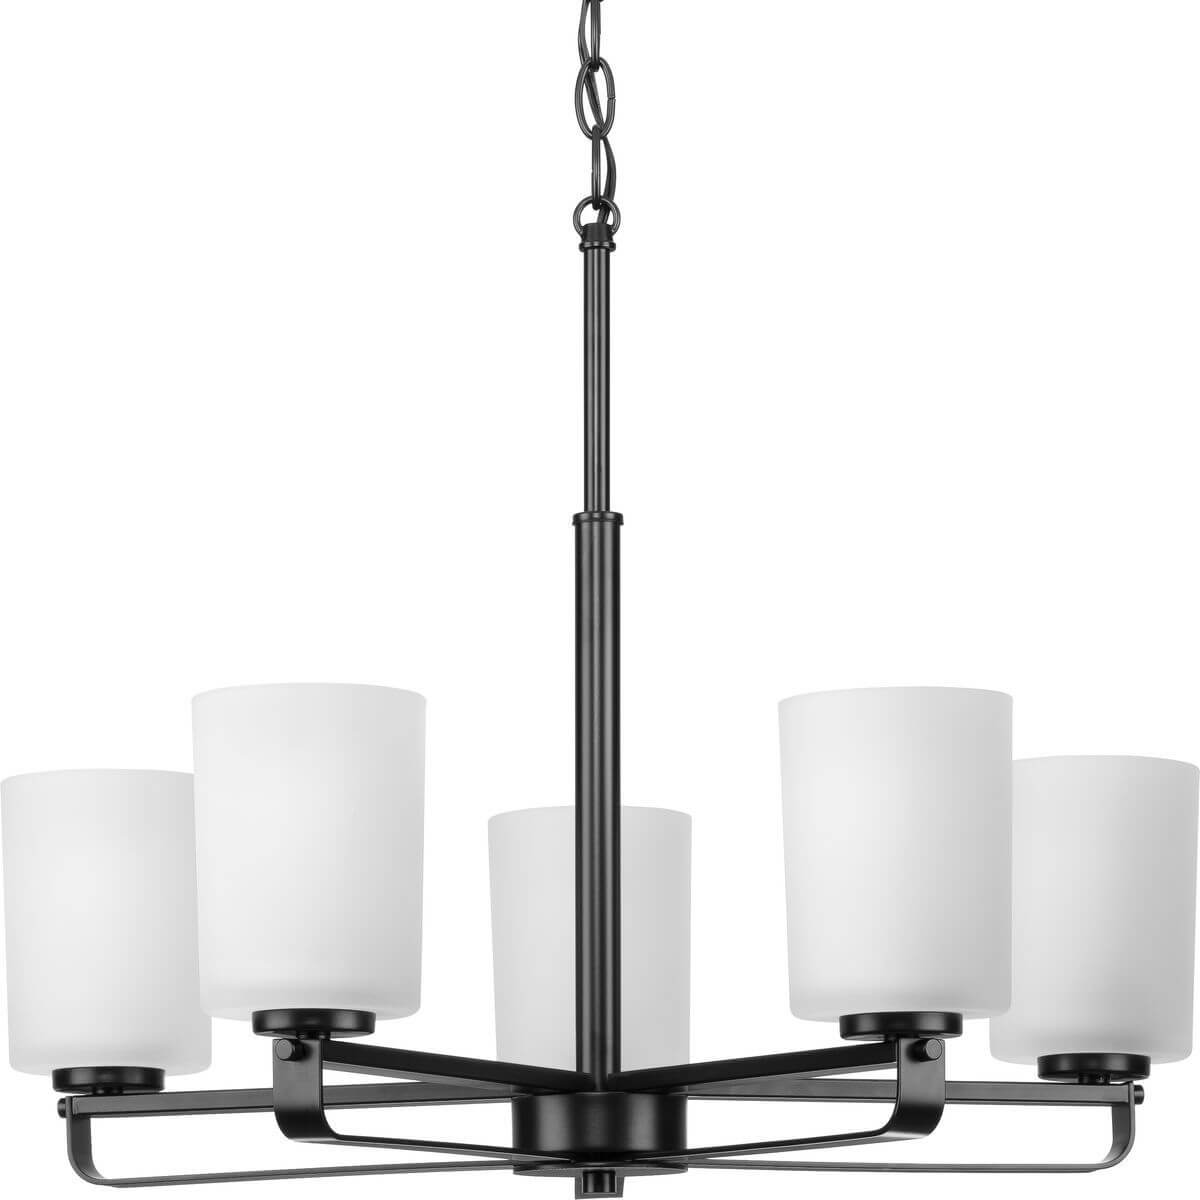 Progress Lighting League 5 Light 24 inch Chandelier in Matte Black with Etched Glass P400286-31M